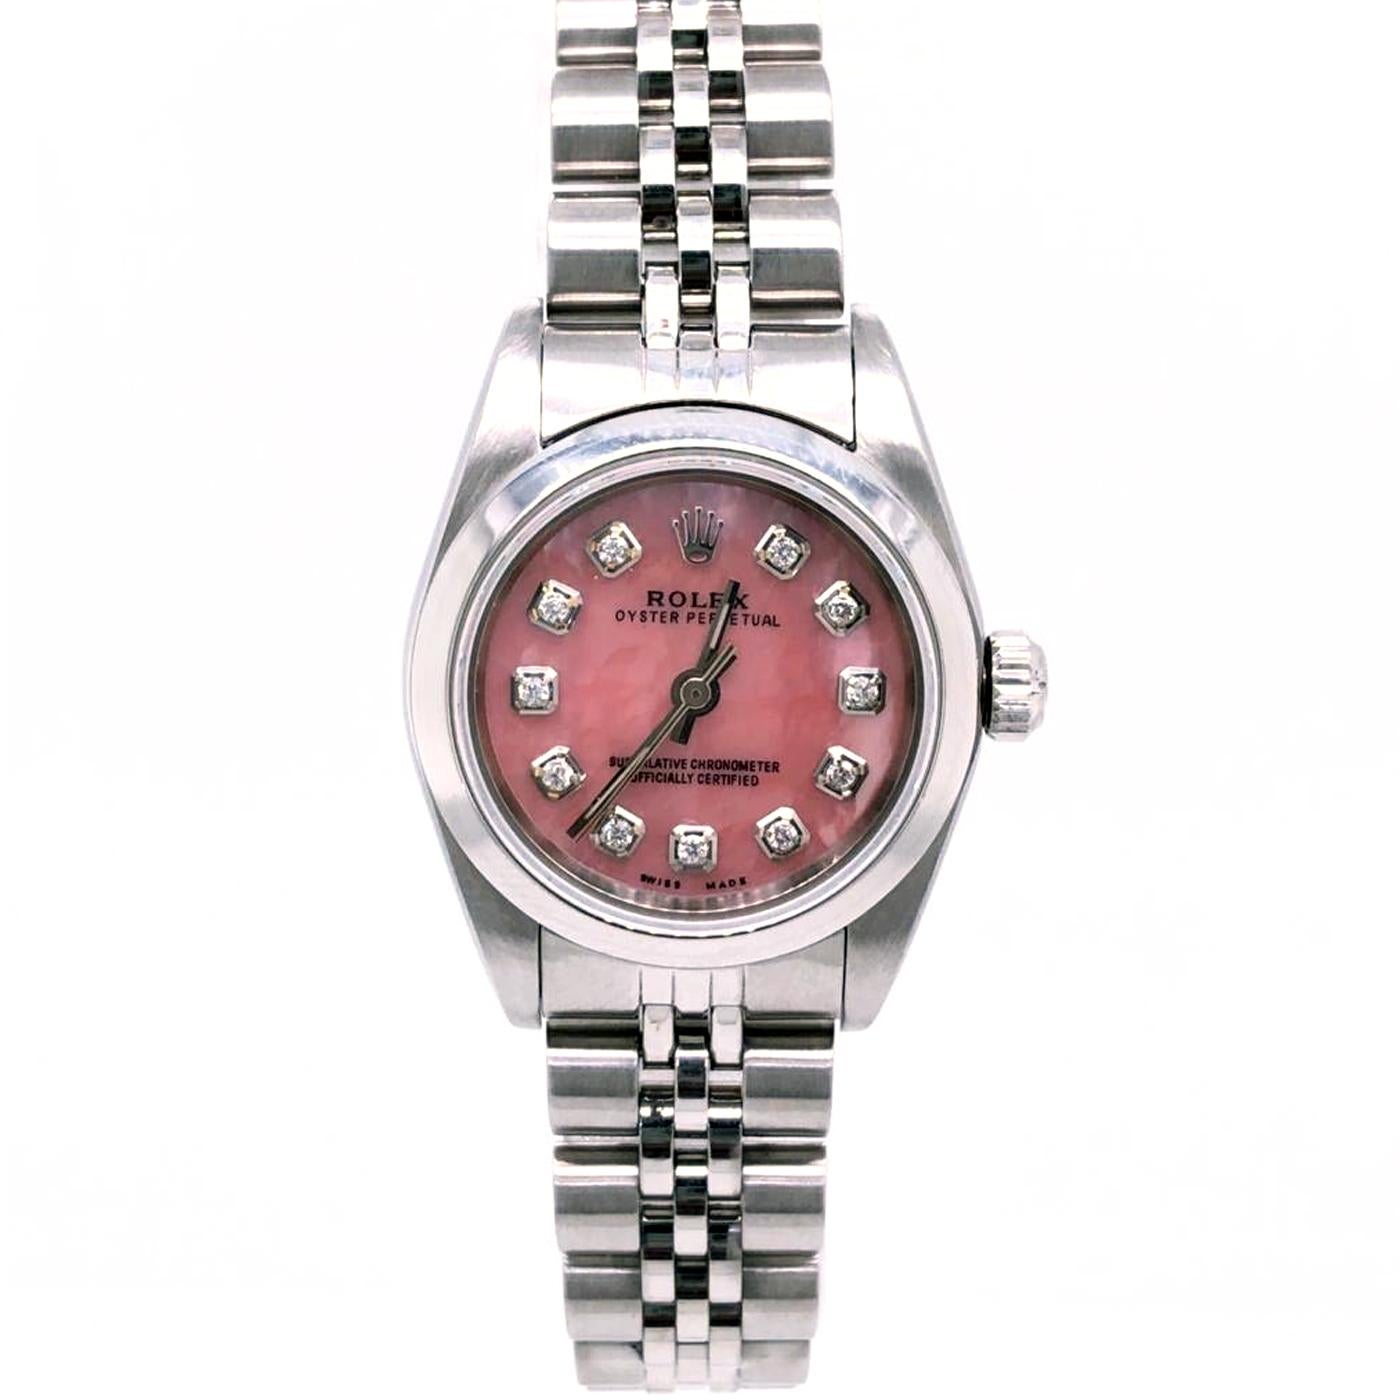 Ladies Rolex Oyster Perpetual in stainless steel, Ref# 76080. On a stainless steel Oyster bracelet with a deployment clasp. Smooth bezel with sapphire crystal. The case diameter is 24mm. Self-winding movement. Pink dial with applied, framed with